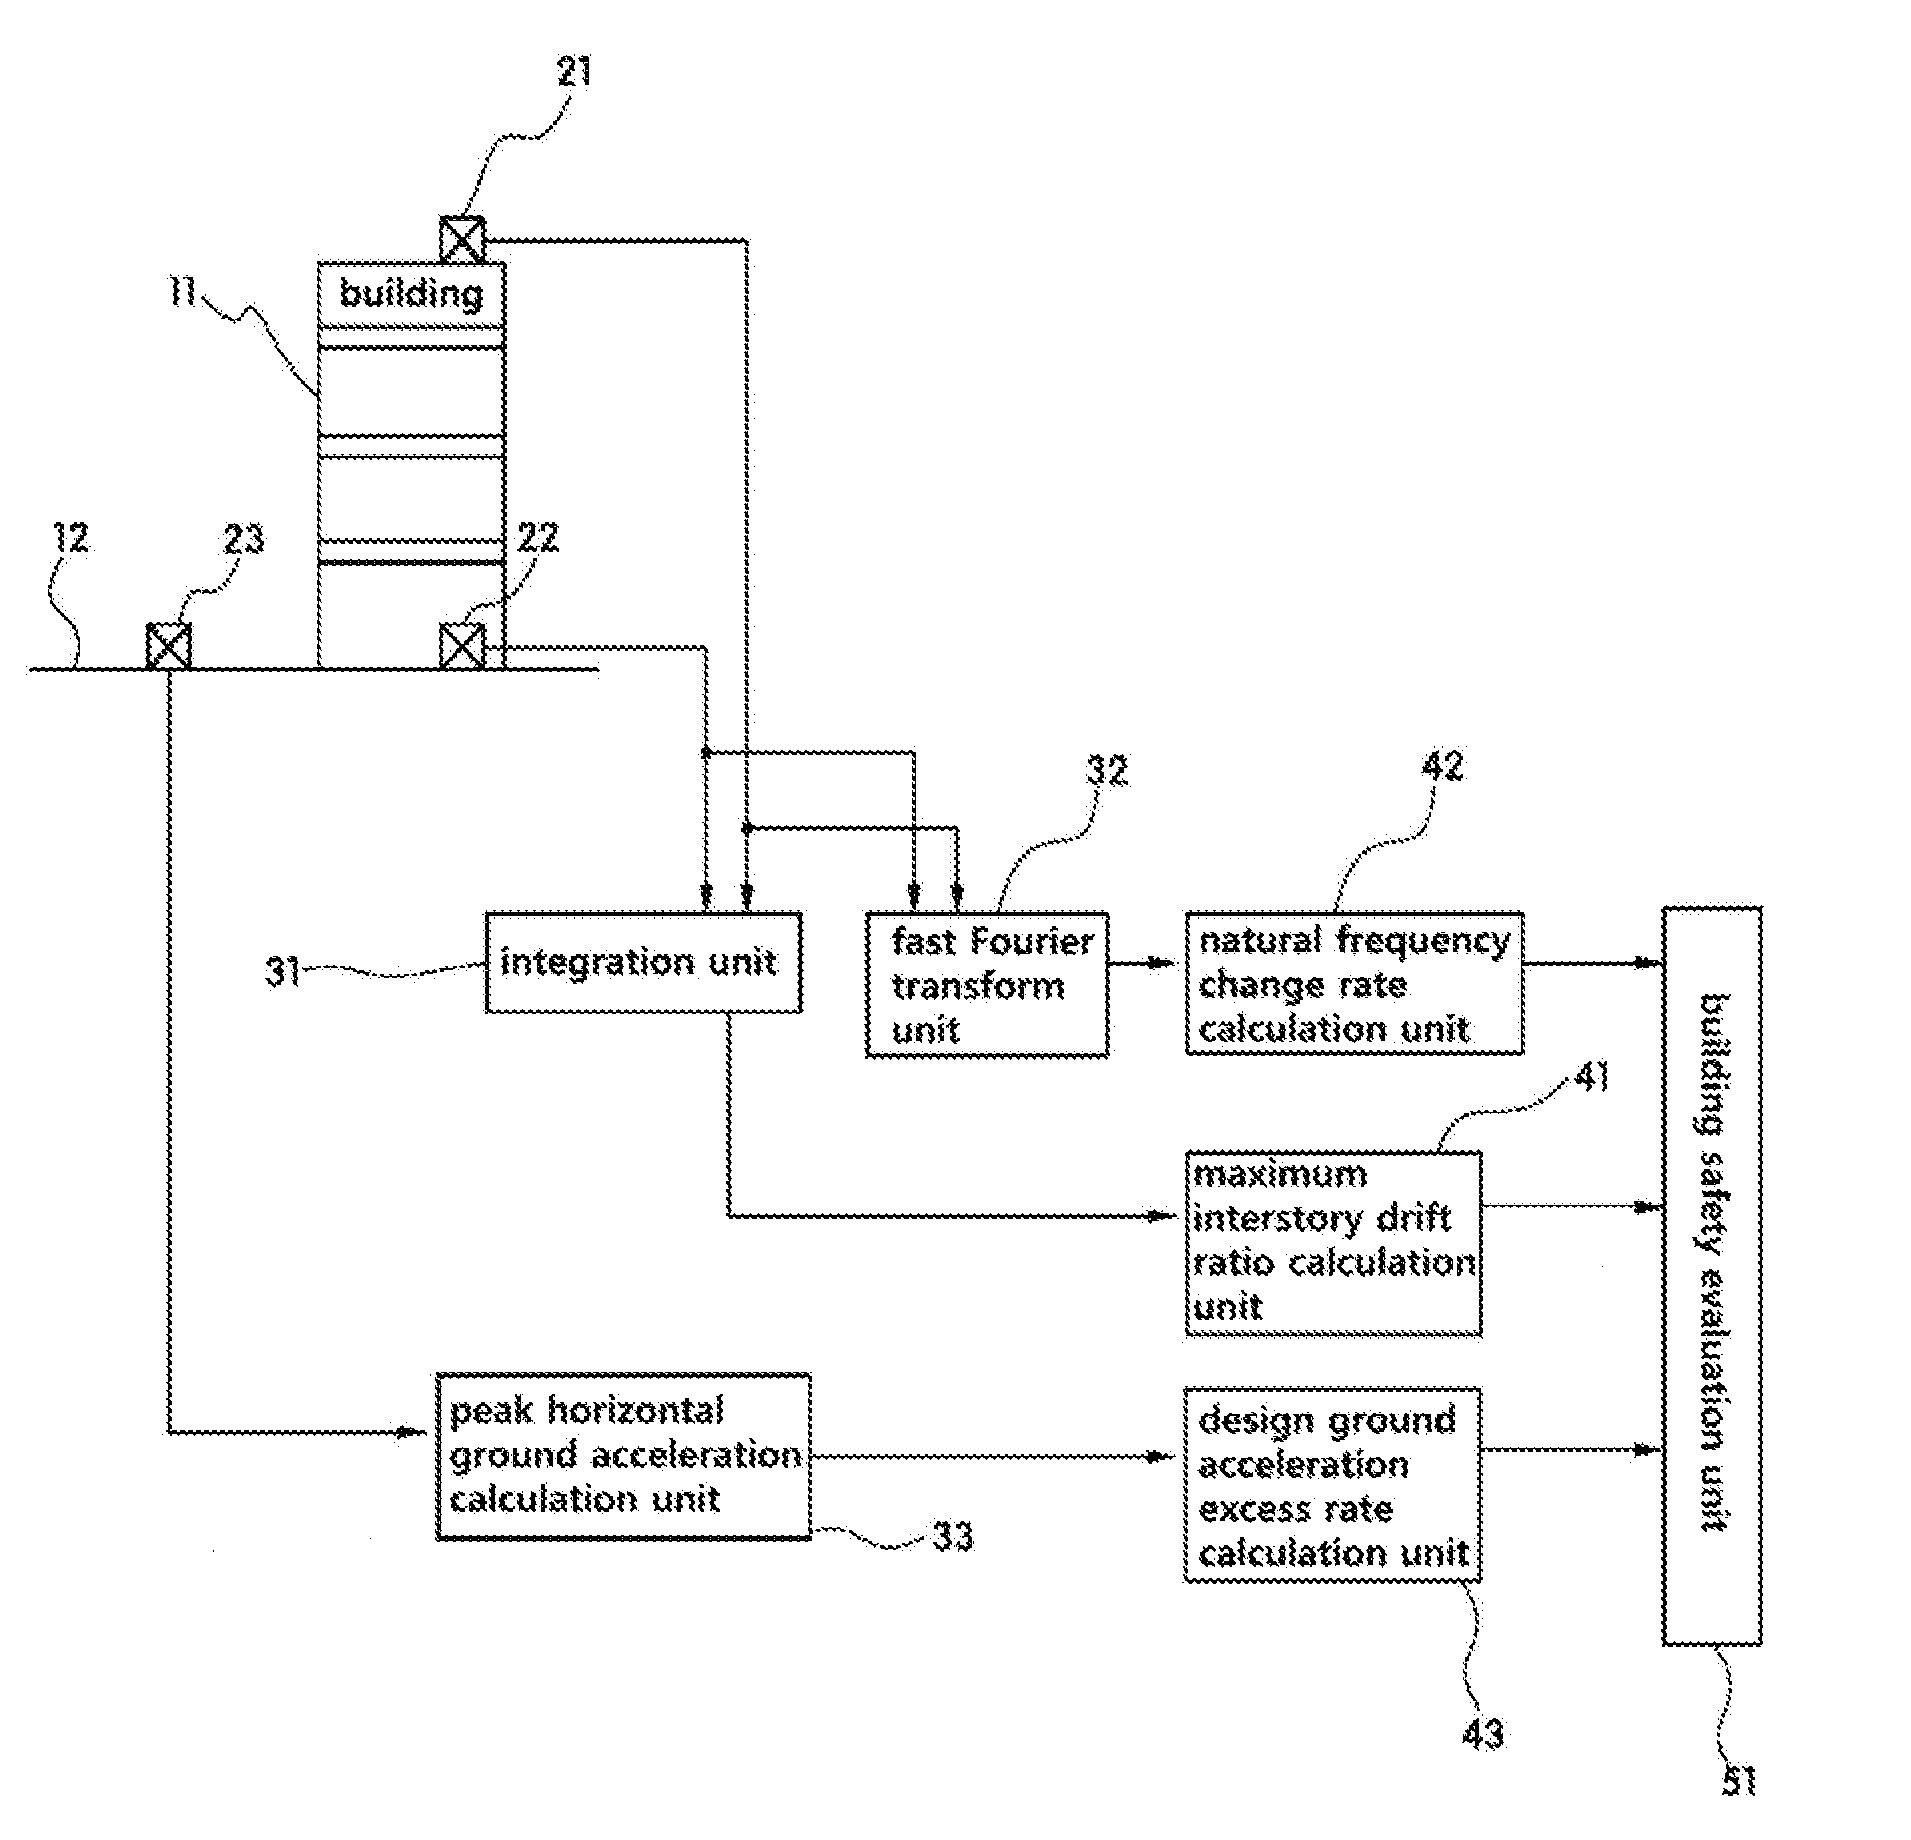 Apparatus for evaluating safety of building using earthquake acceleration measurement